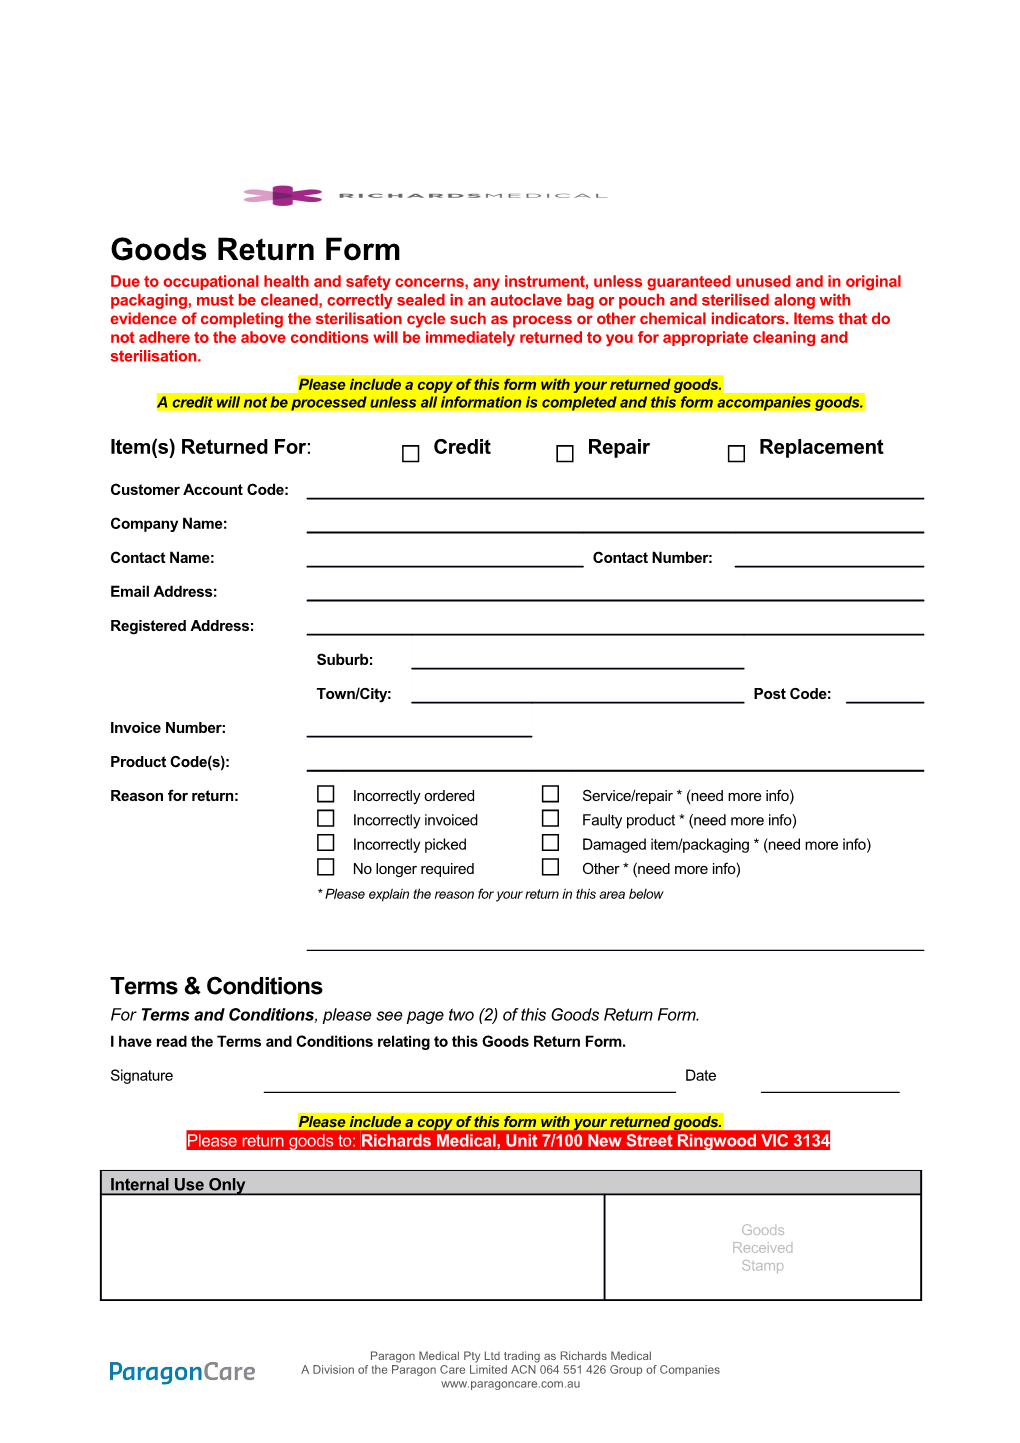 Please Include a Copy of This Form with Your Returned Goods